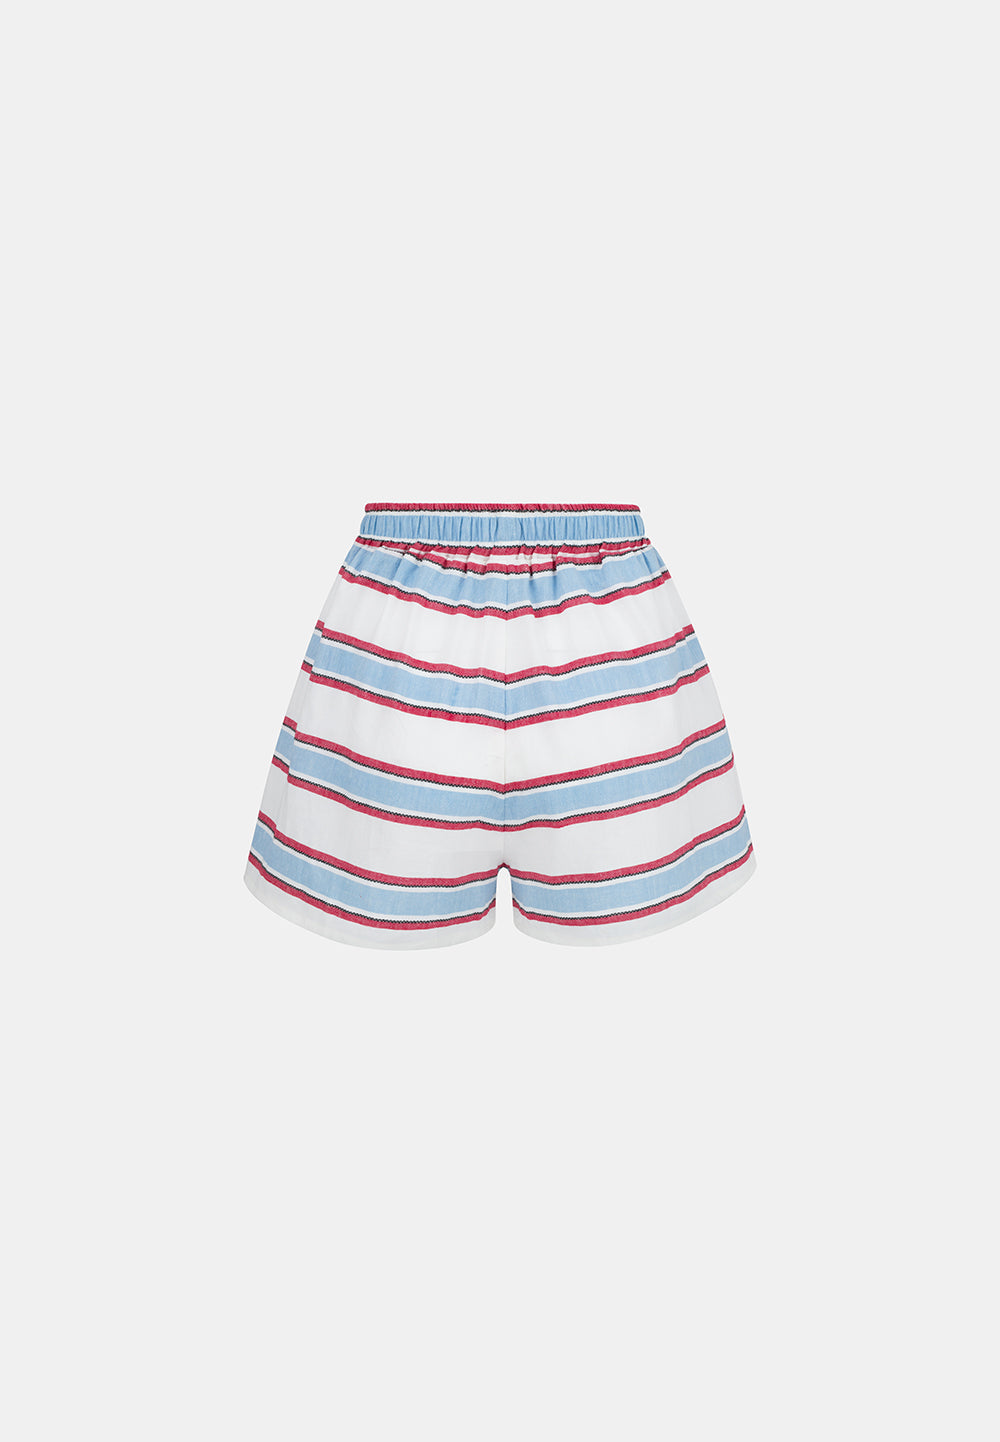 BISCUIT SHORTS STRIPES